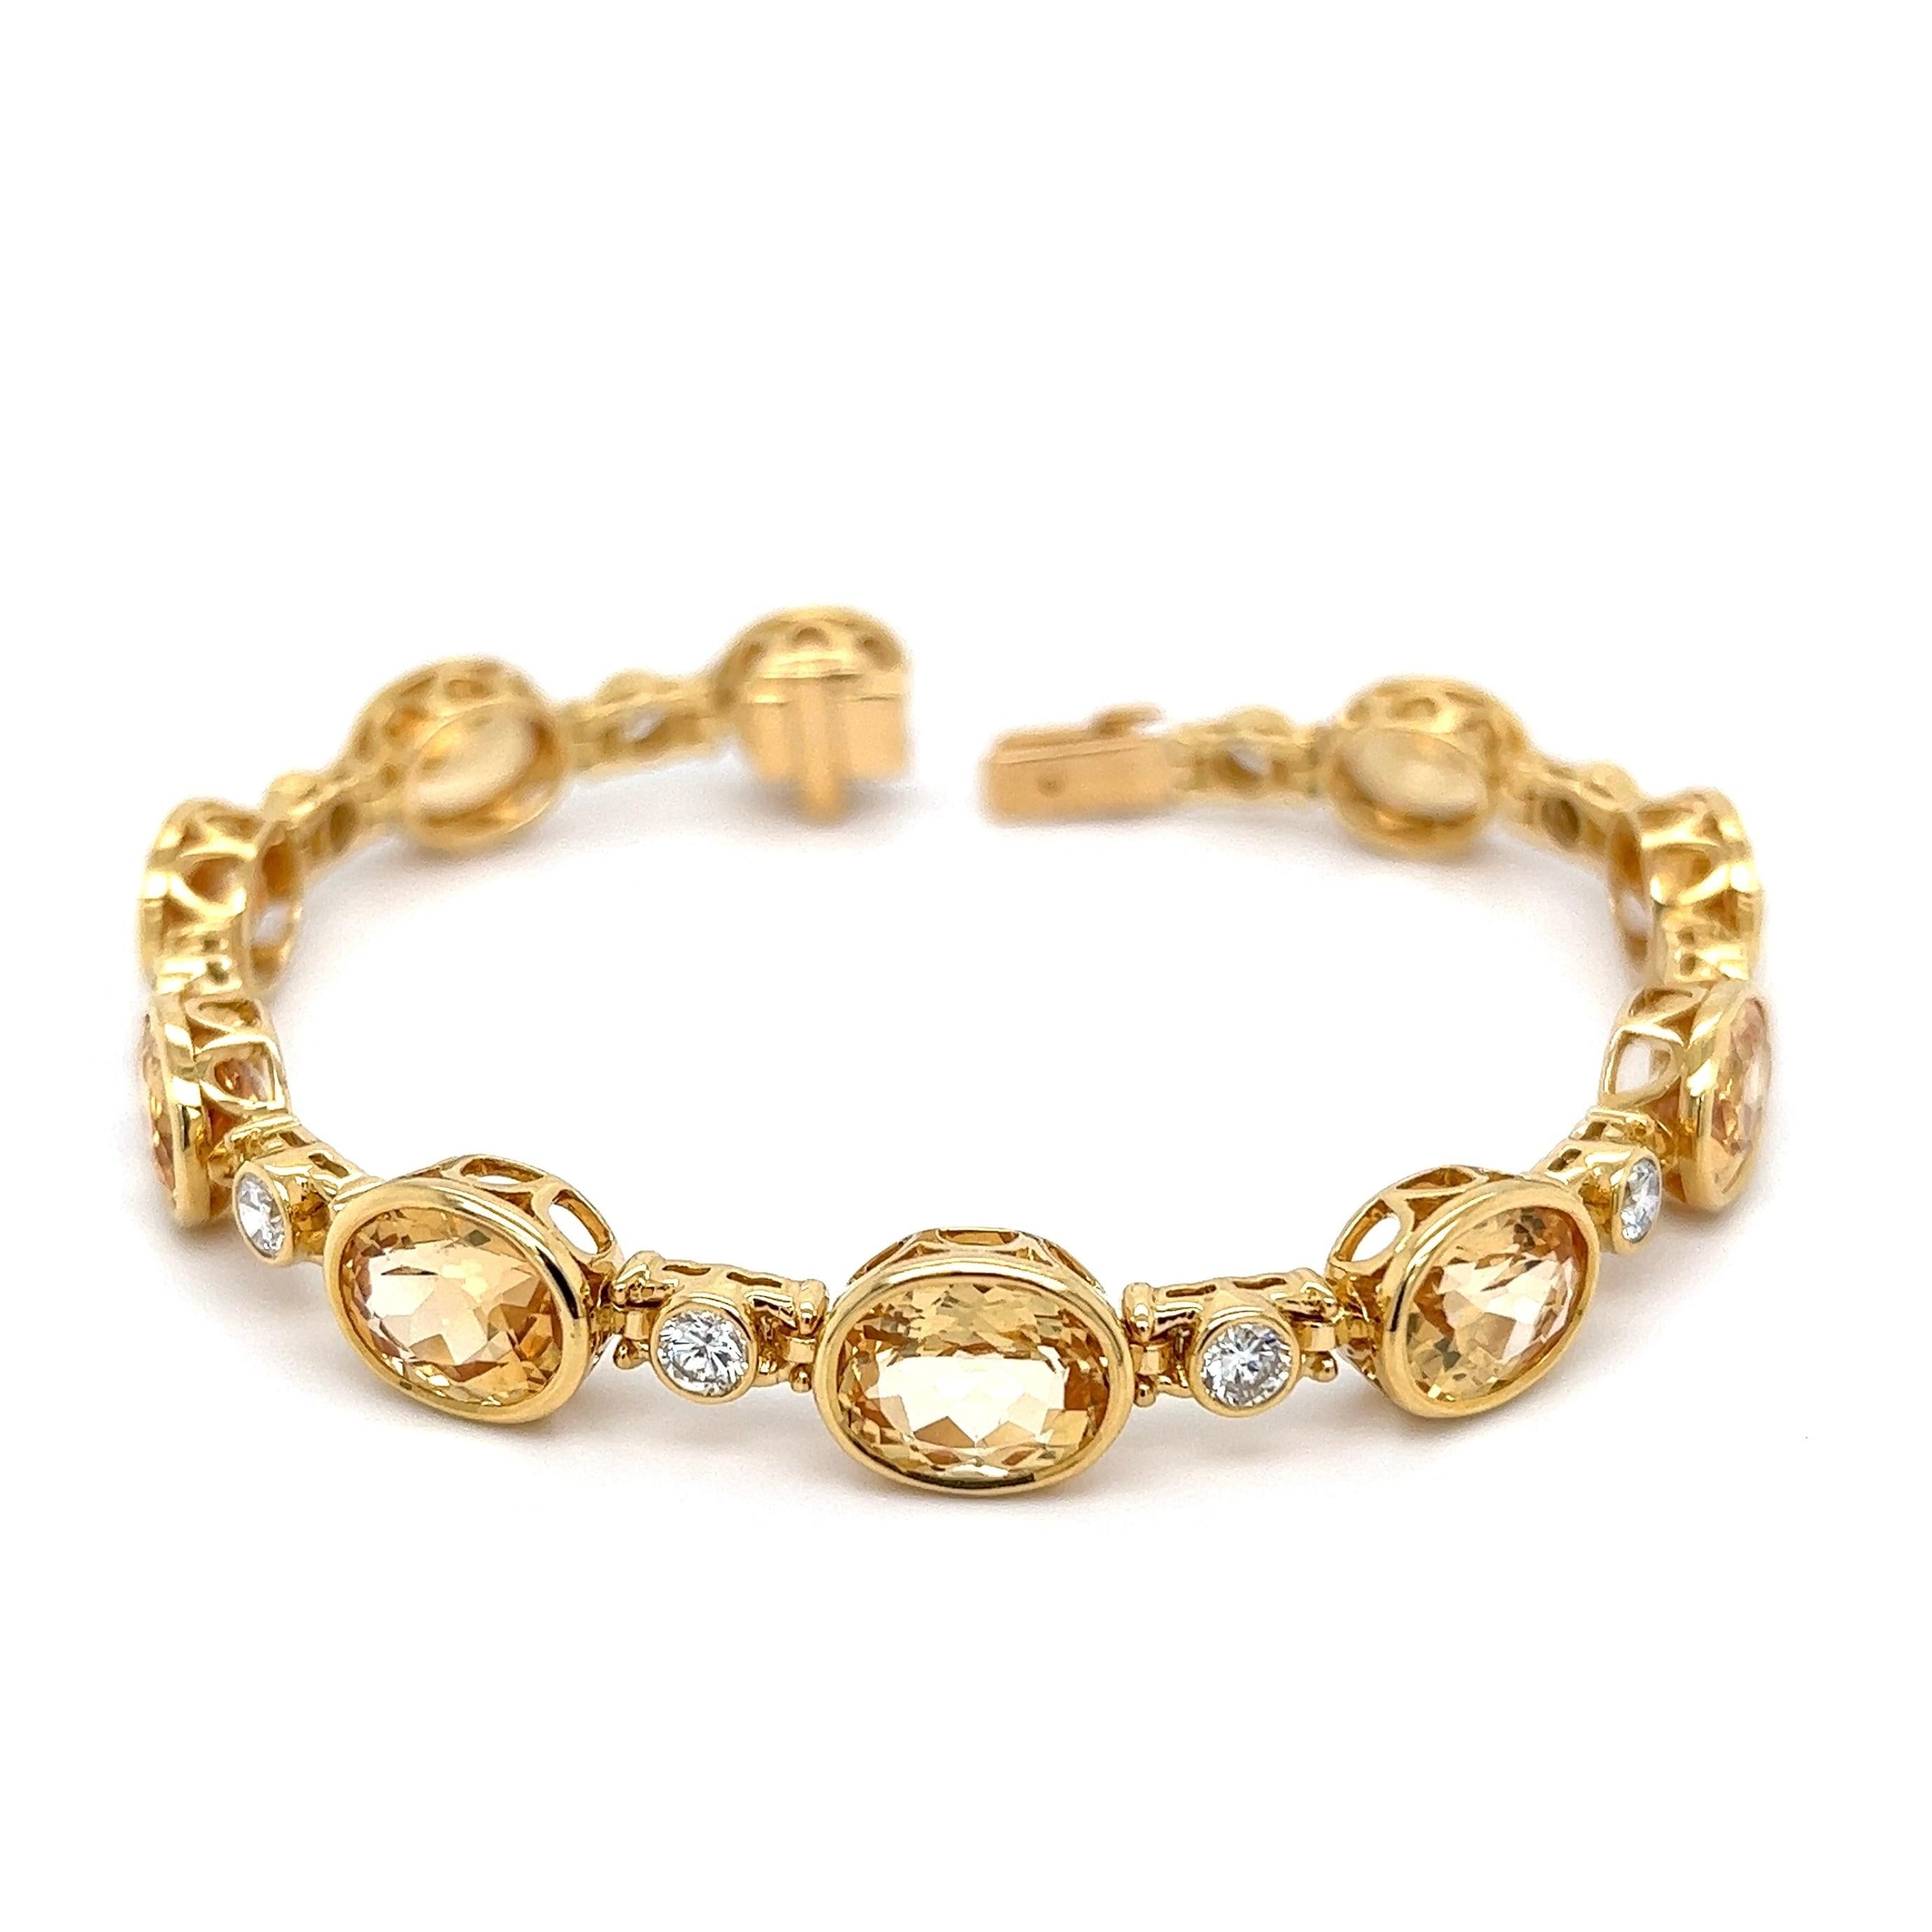 Simply Beautiful! Imperial Topaz and Diamond Gold Bracelet. Featuring 10 matching Imperial Topaz weighing approx. 30tcw. Interspaced with Diamonds, weighing approx. 1.70tcw. Dimensions 7” L x 0.34” W x 0.20” H. Hand Bezel-set; Hand crafted 18K